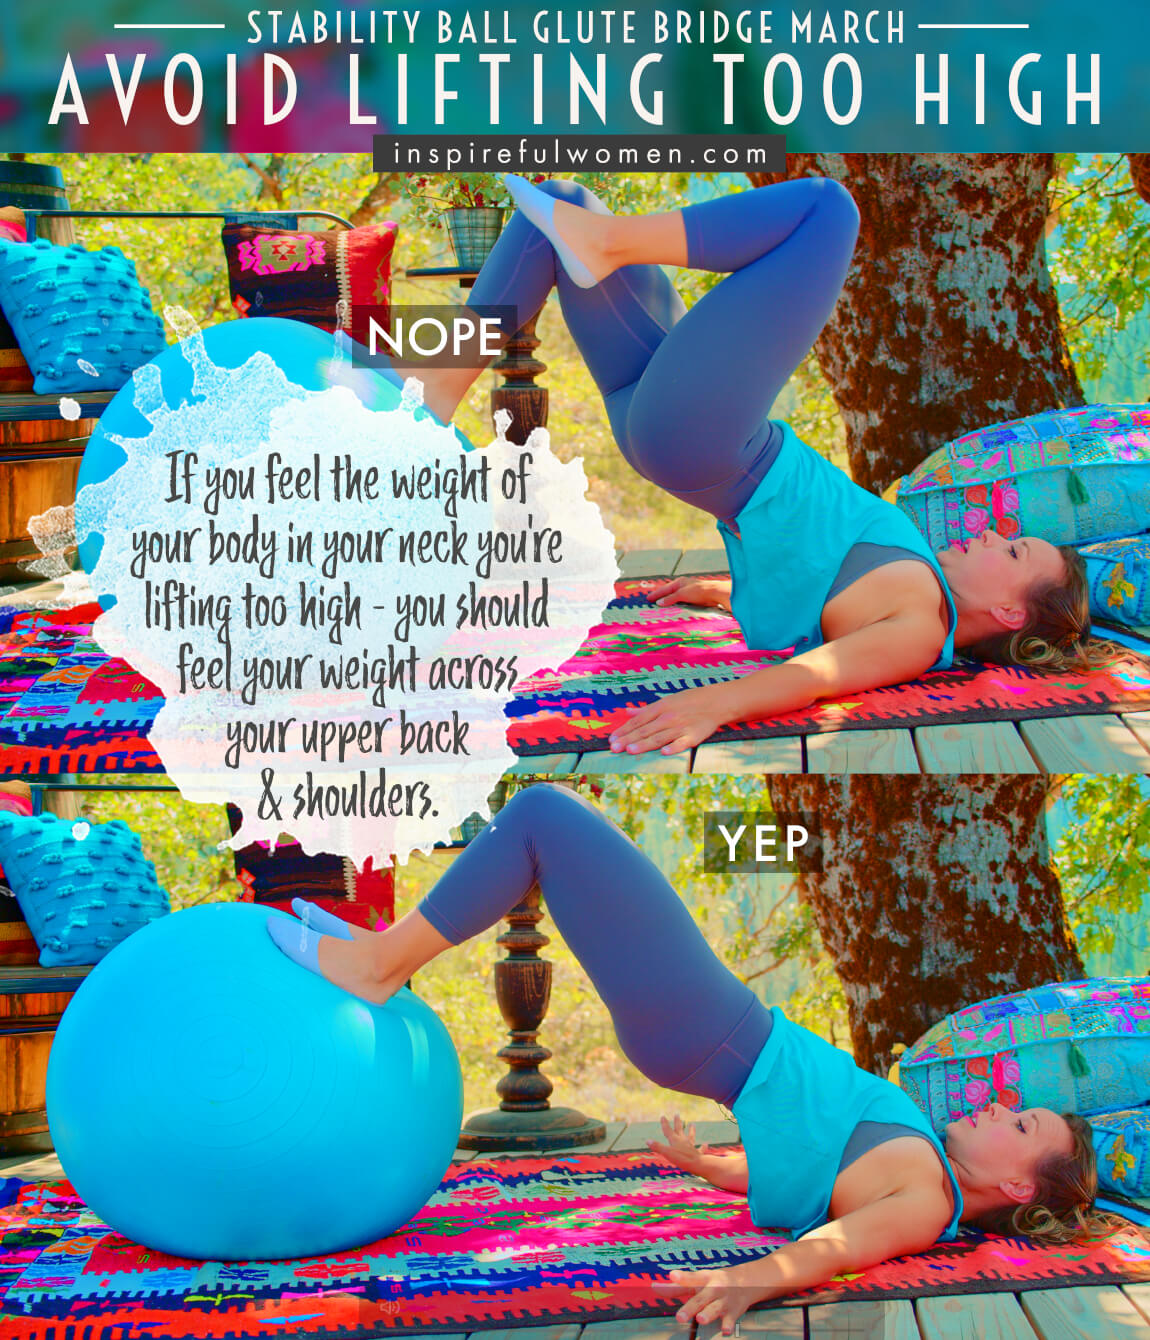 avoid-lifting-too-high-marching-stability-ball-glute-bridge-common-mistakes